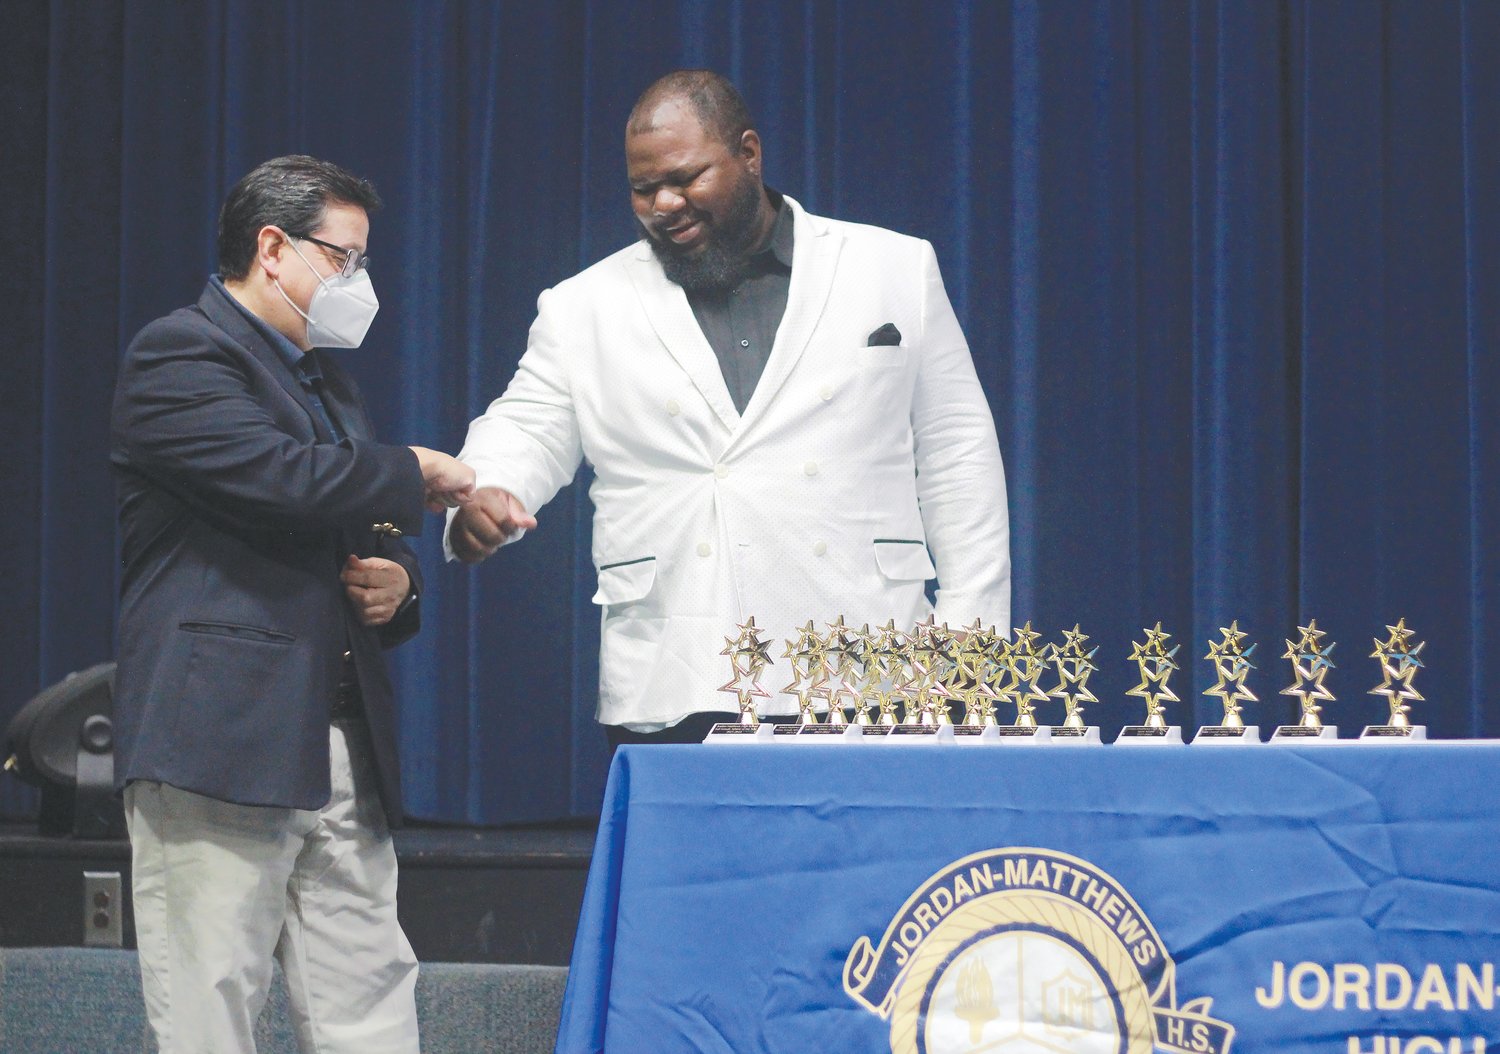 Jordan-Matthews men's soccer head coach Paul Cuadros (left) fist bumps Lamont Piggie, the women's basketball and track & field head coach, during The Jetties ceremony on May 31. Piggie took home the award for Coach of the Year.